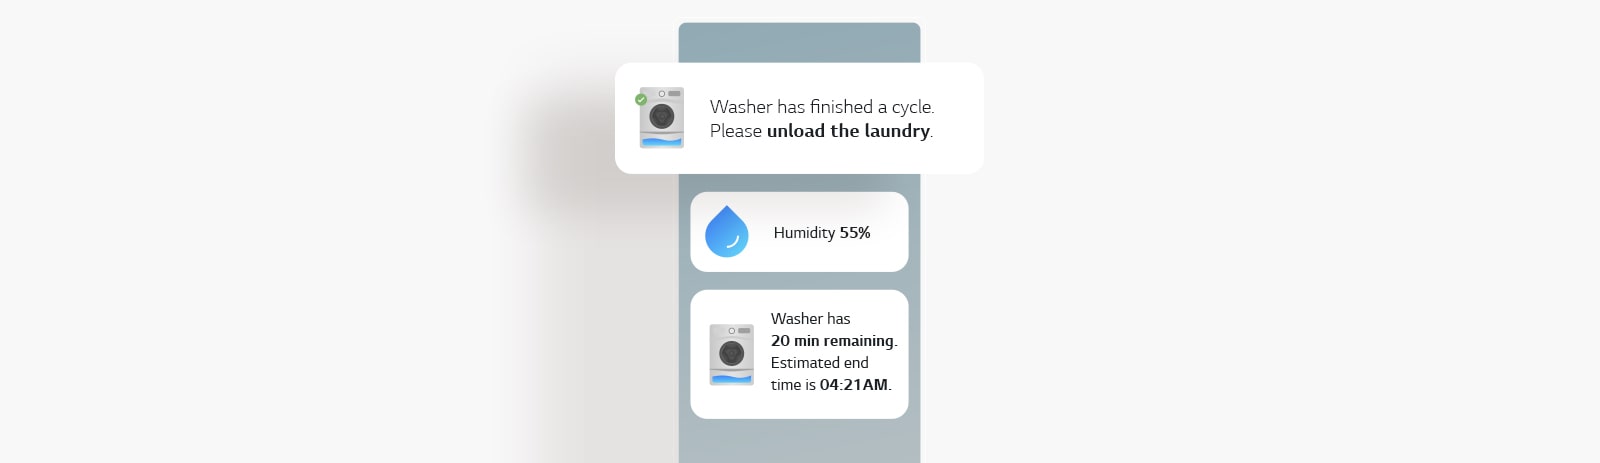 Image shows a screen displaying status updates of the washer in the LG ThinQ app.